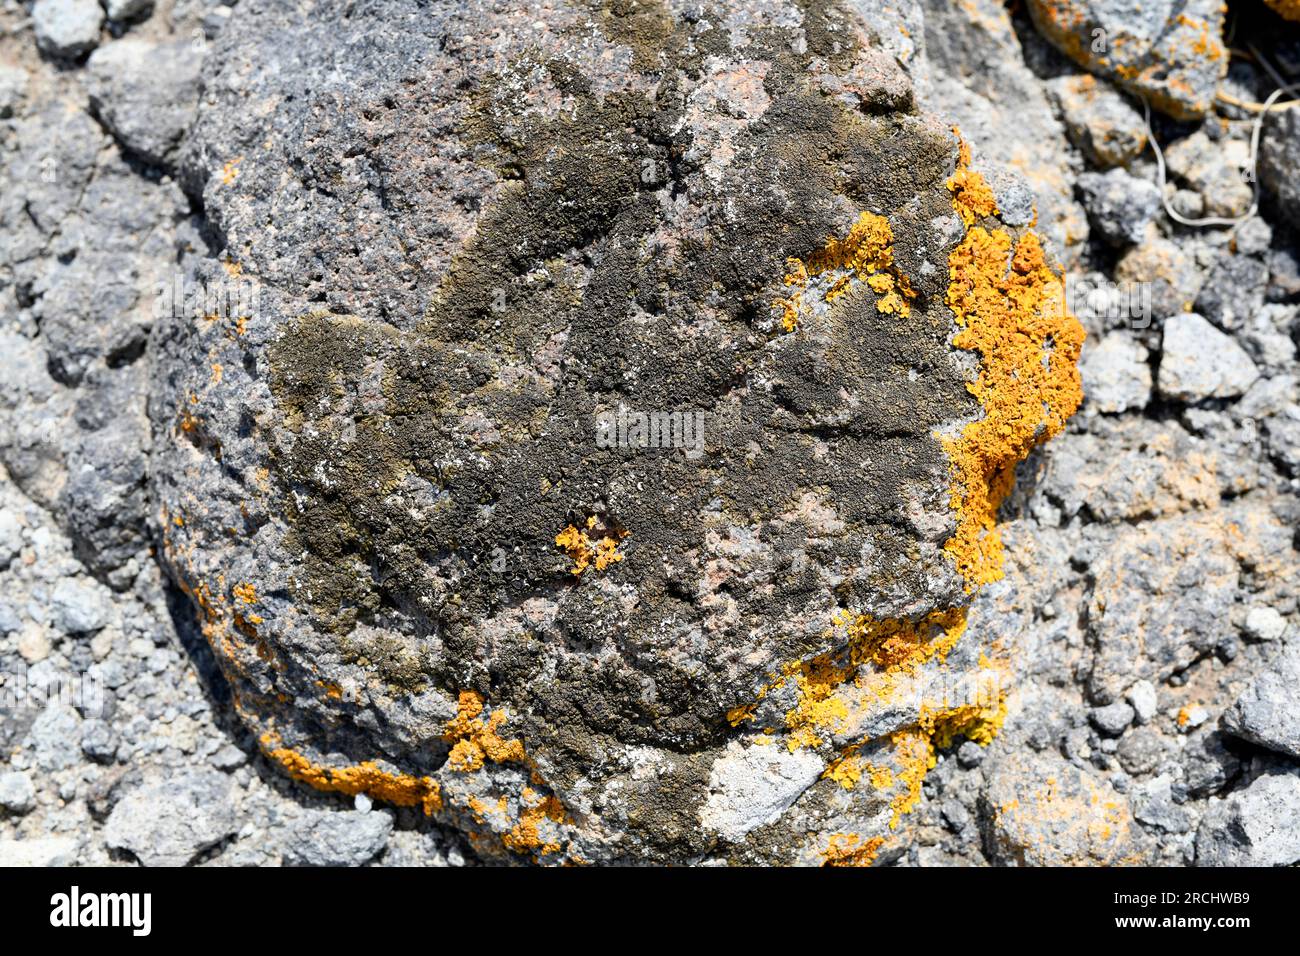 Parmelia pulla, Neofuscelia pulla or Xanthoparmelia pulla is a foliose lichen. Growing on andesite volcanic rock. This photo was taken in Cabo de Gata Stock Photo